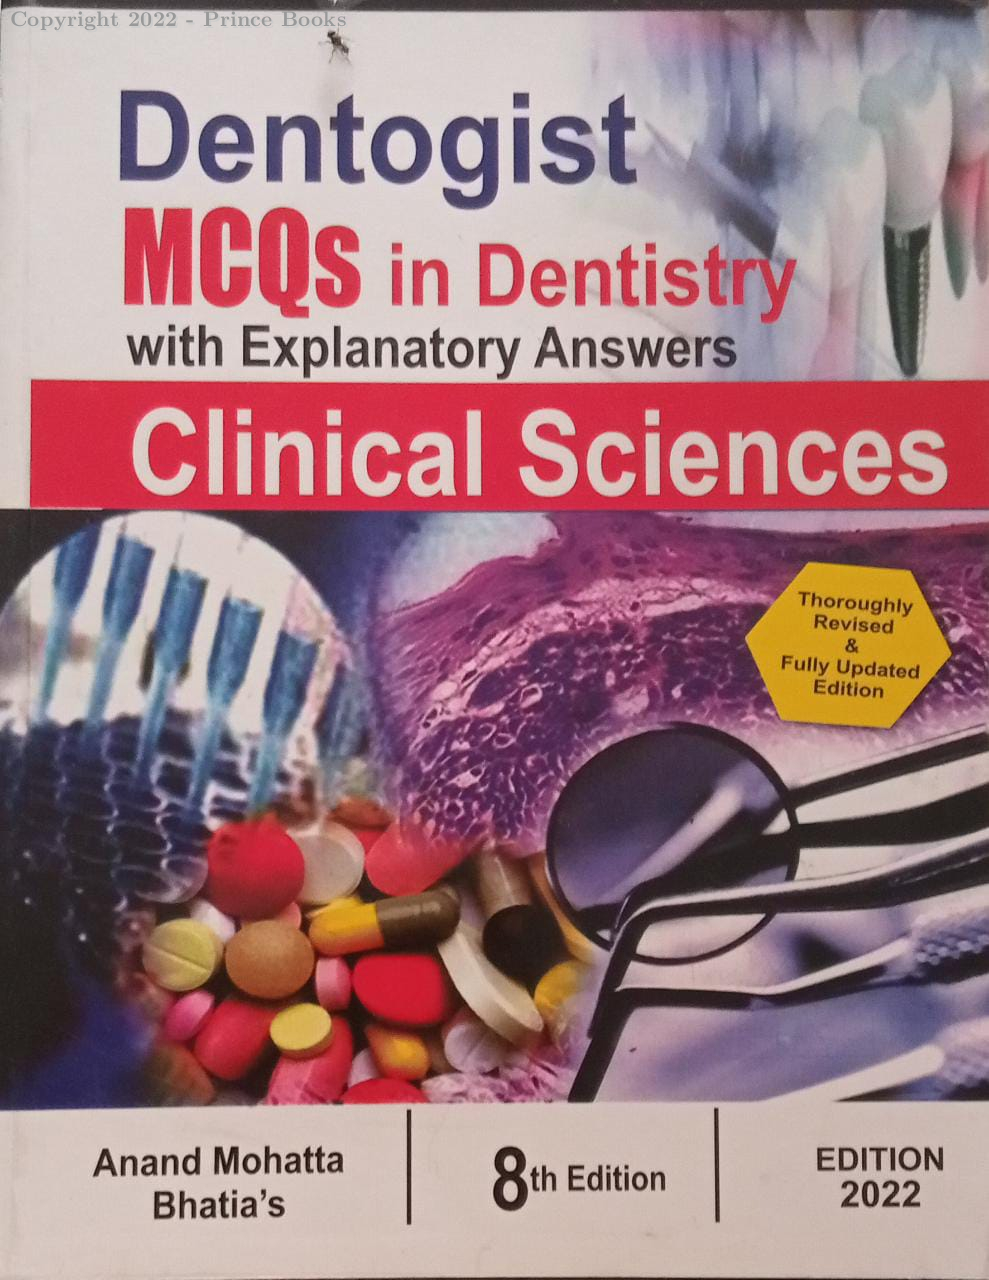 Dentogist MCQs in Dentistry With Explanatory Answers, Clinical Sciences, 8e